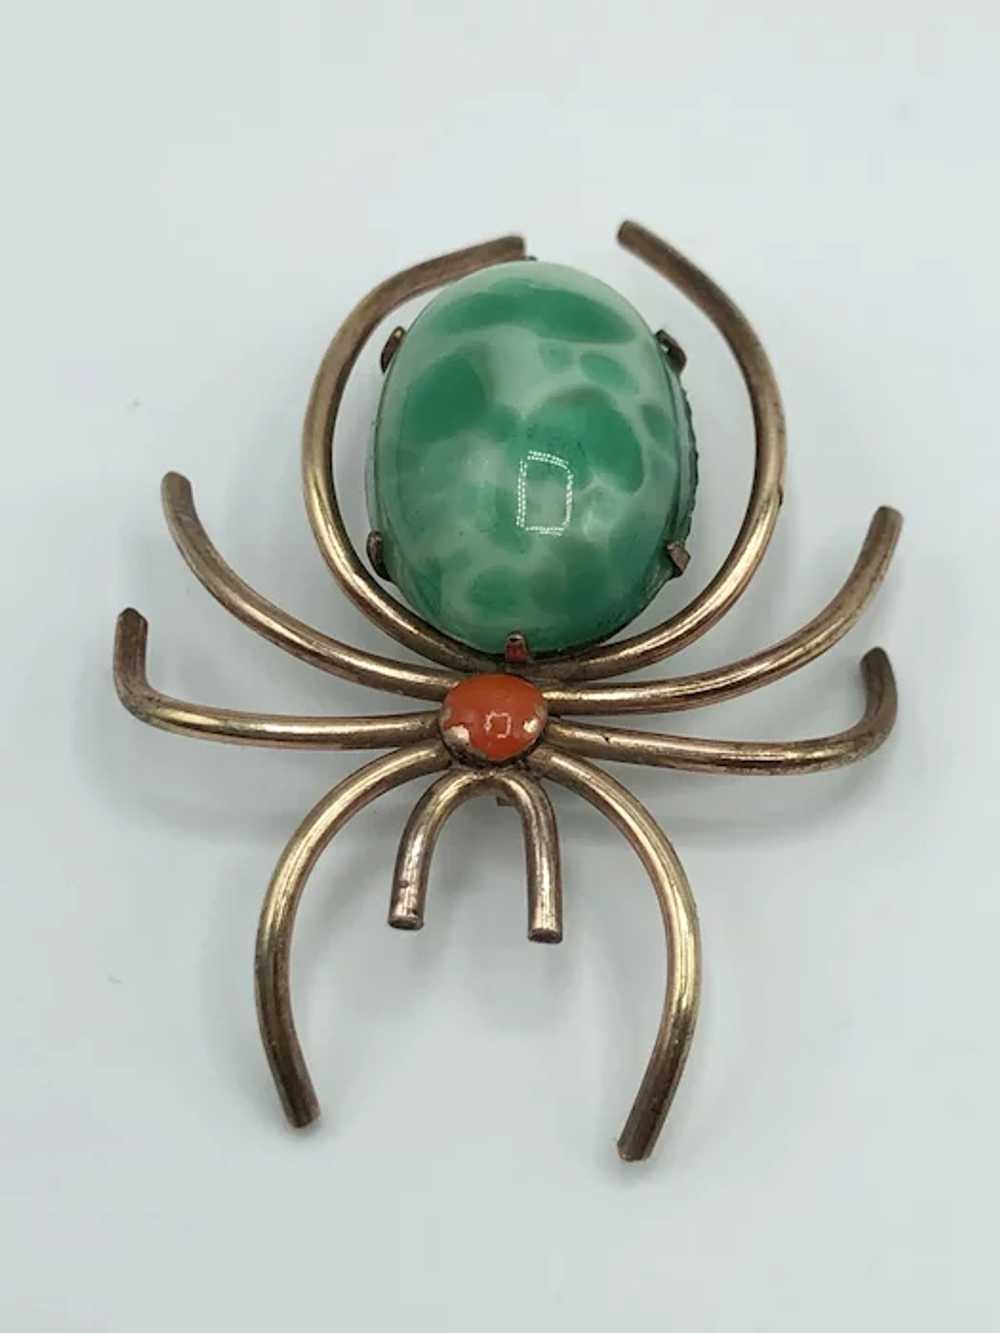 10k Gold Filled White Co Spider Brooch Pin - image 6